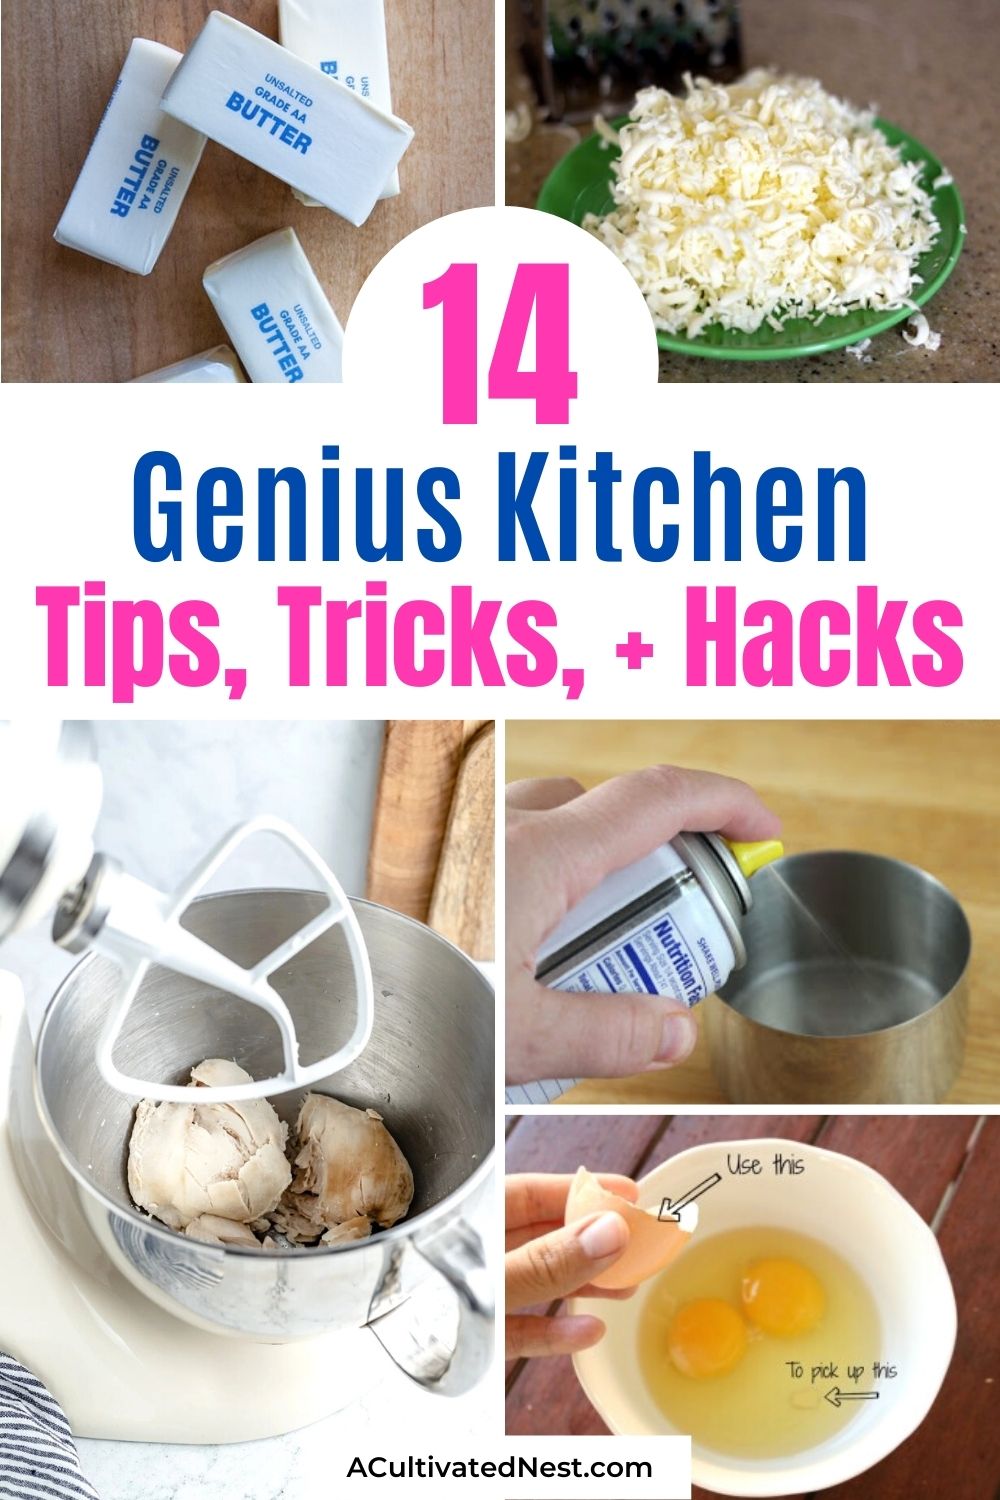 14 Clever Kitchen Tips You Need to Know- Check out these super helpful kitchen tips, tricks, and hacks to help you spend less time in the kitchen! They're so easy to do! | #kitchenTips #kitchenTricks #kitchenHacks #cookingTIps #ACultivatedNest